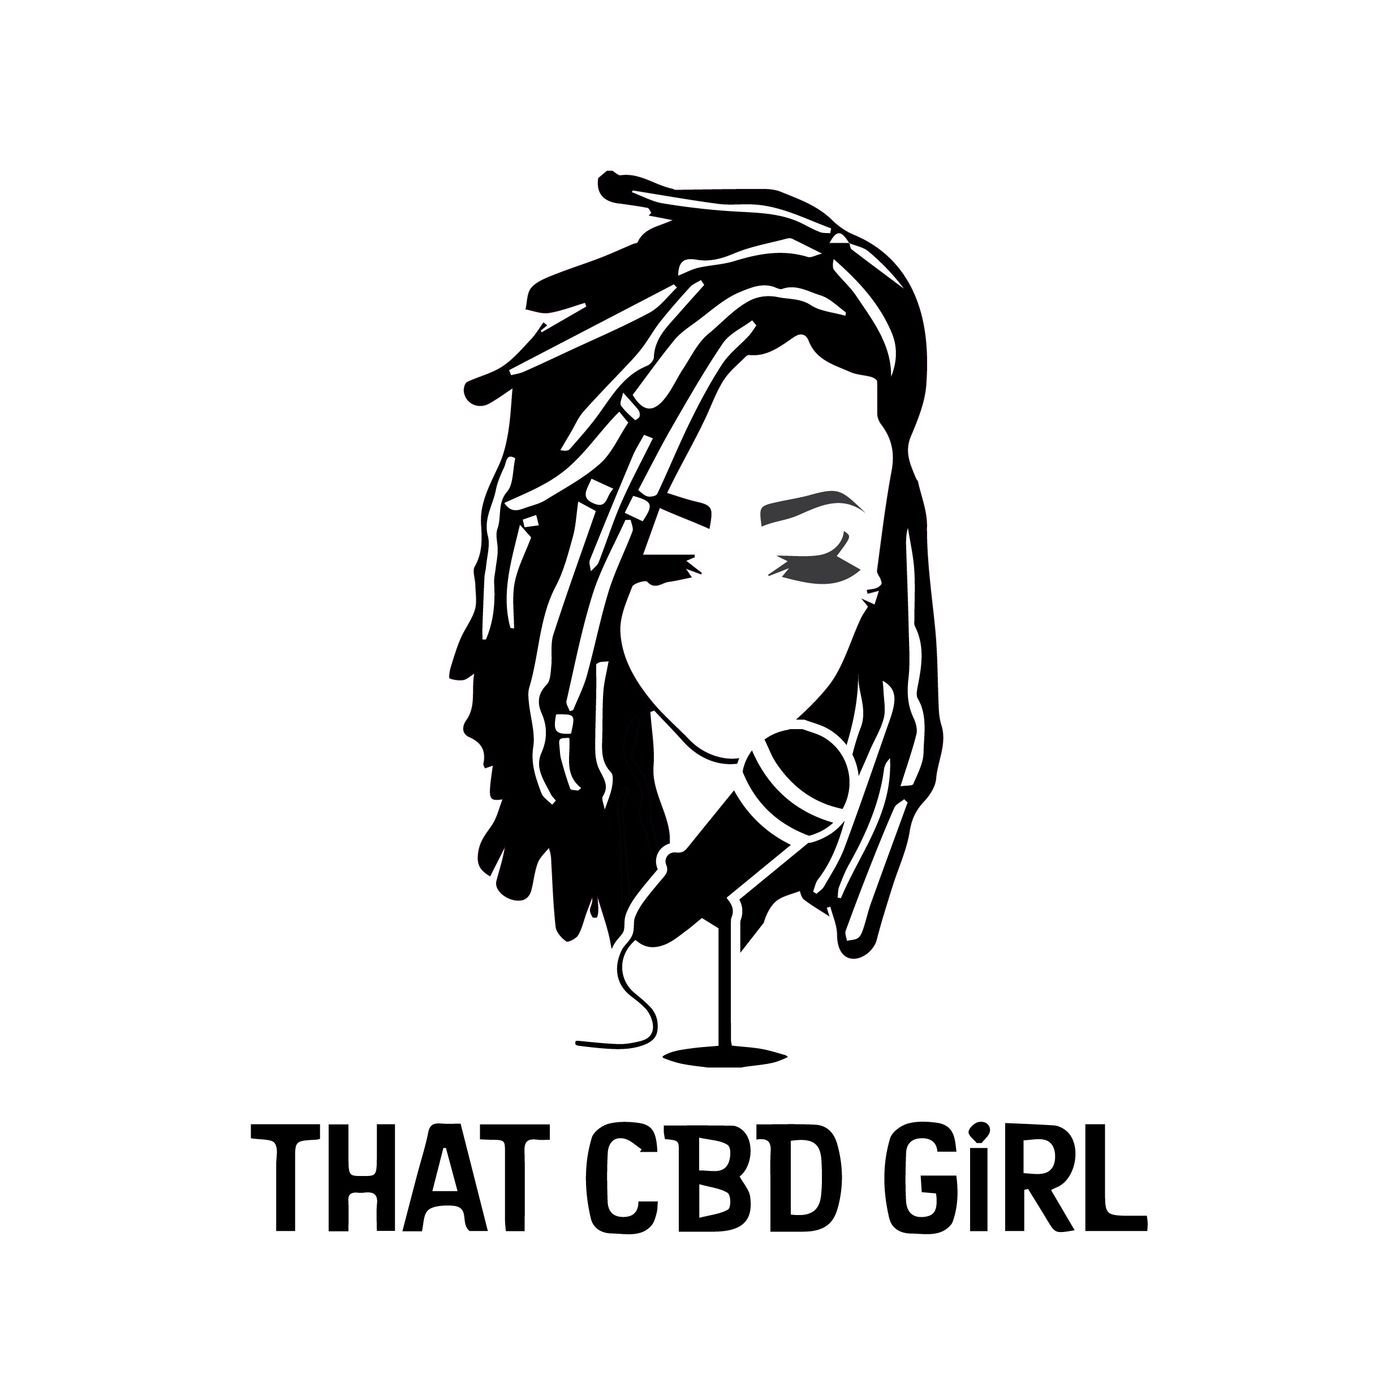 Episode 8: CBD Didn't work for me. That CBD Girl Challenges YOU to Try Again With This Guide!